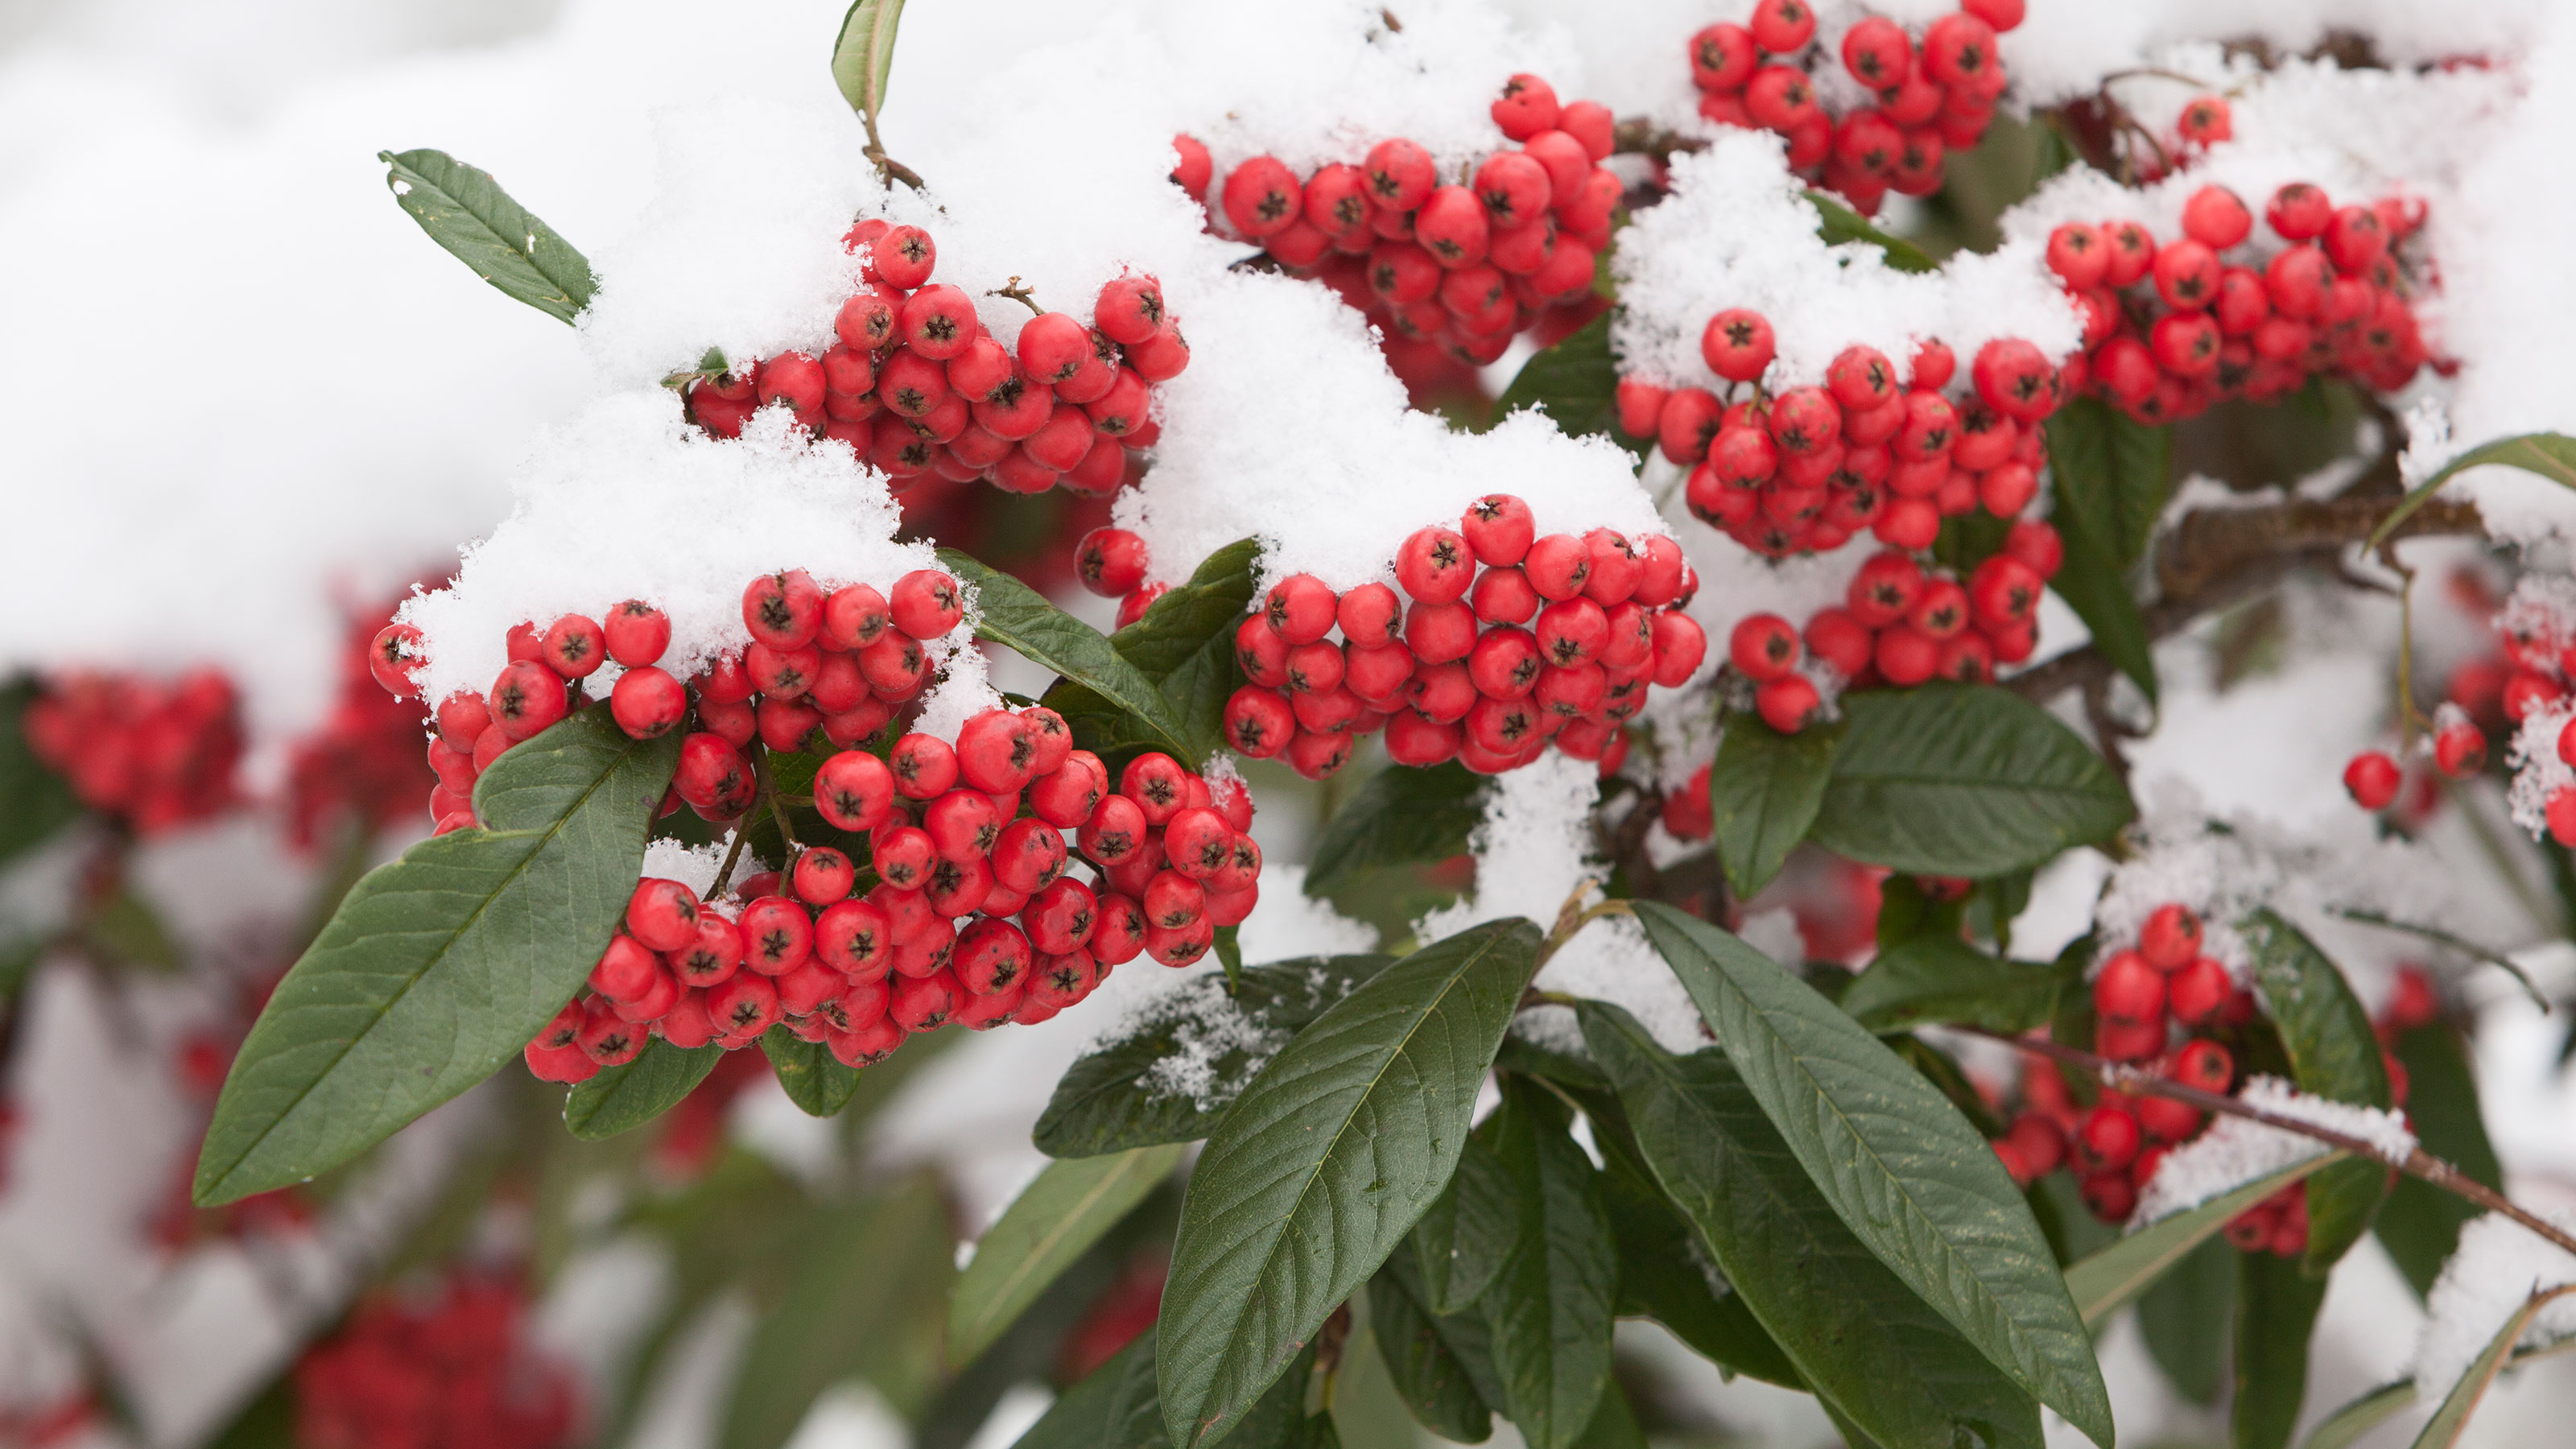 Bushes with red berries offer winter garden color